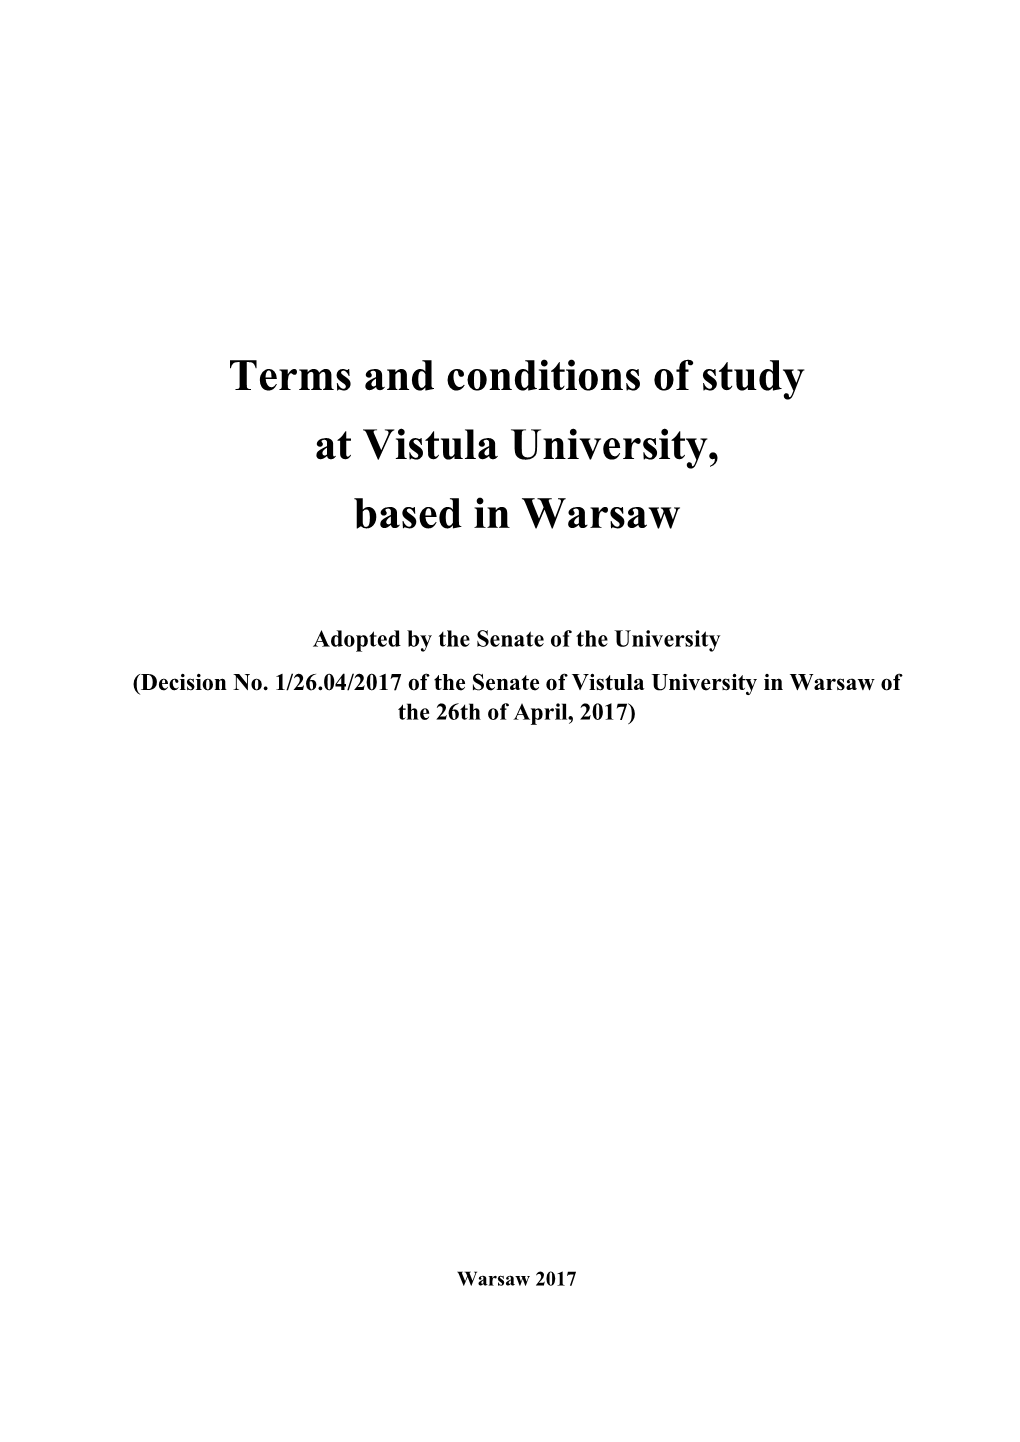 Terms and Conditions of Study at Vistula University, Based in Warsaw